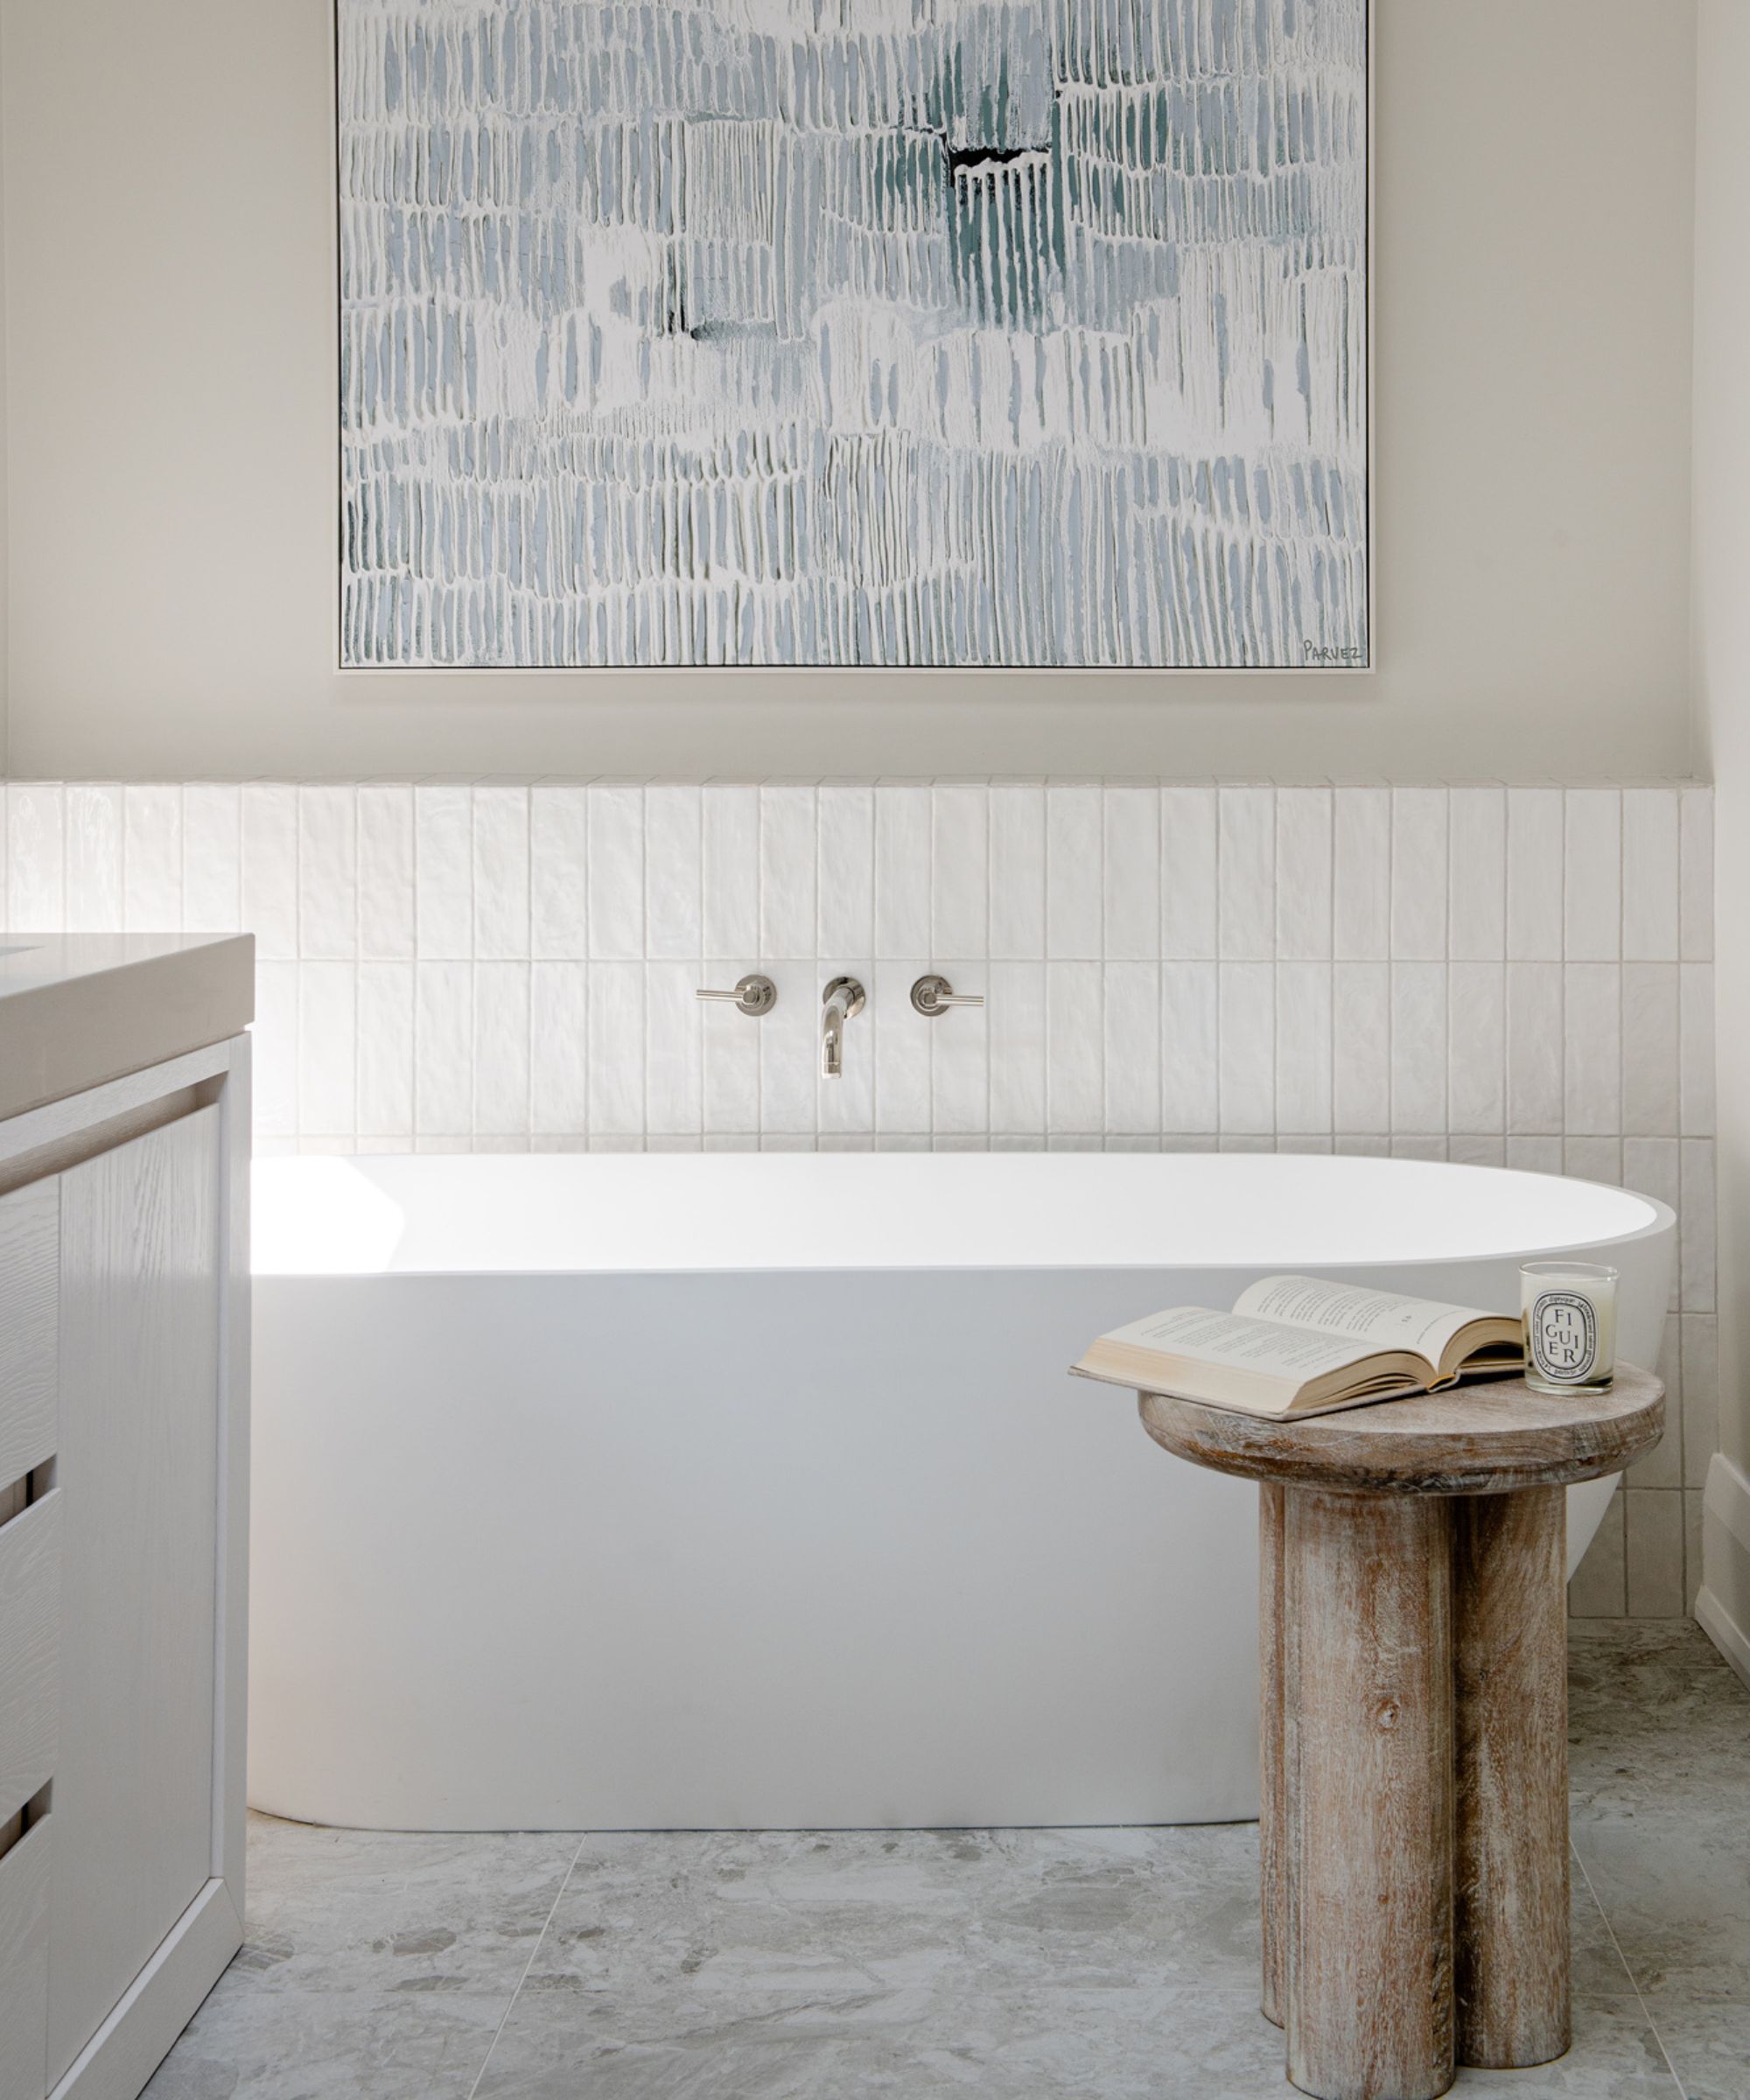 A bathroom with a freestanding tub and a large piece of artwork hanging above